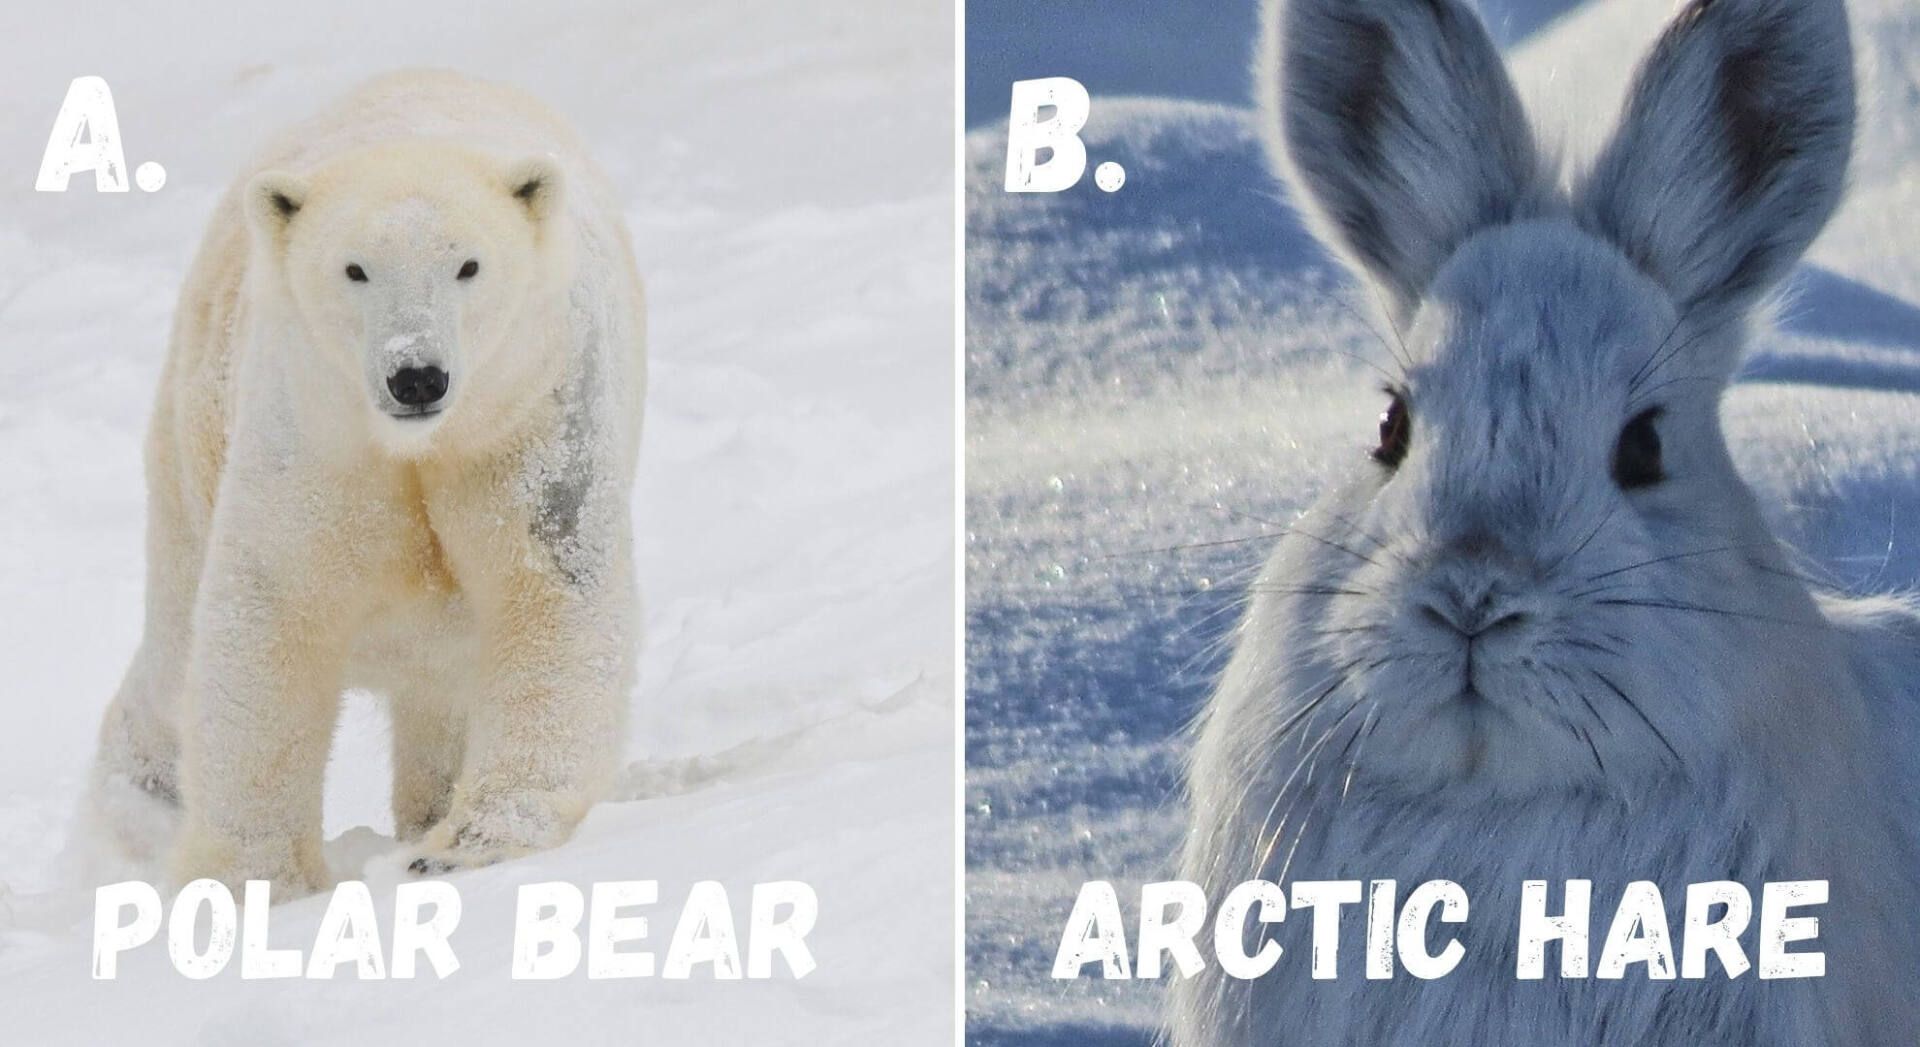 polar bears are an apex predator in the tundra, unlike arctic hares which are herbivores and preyed upon by large predators